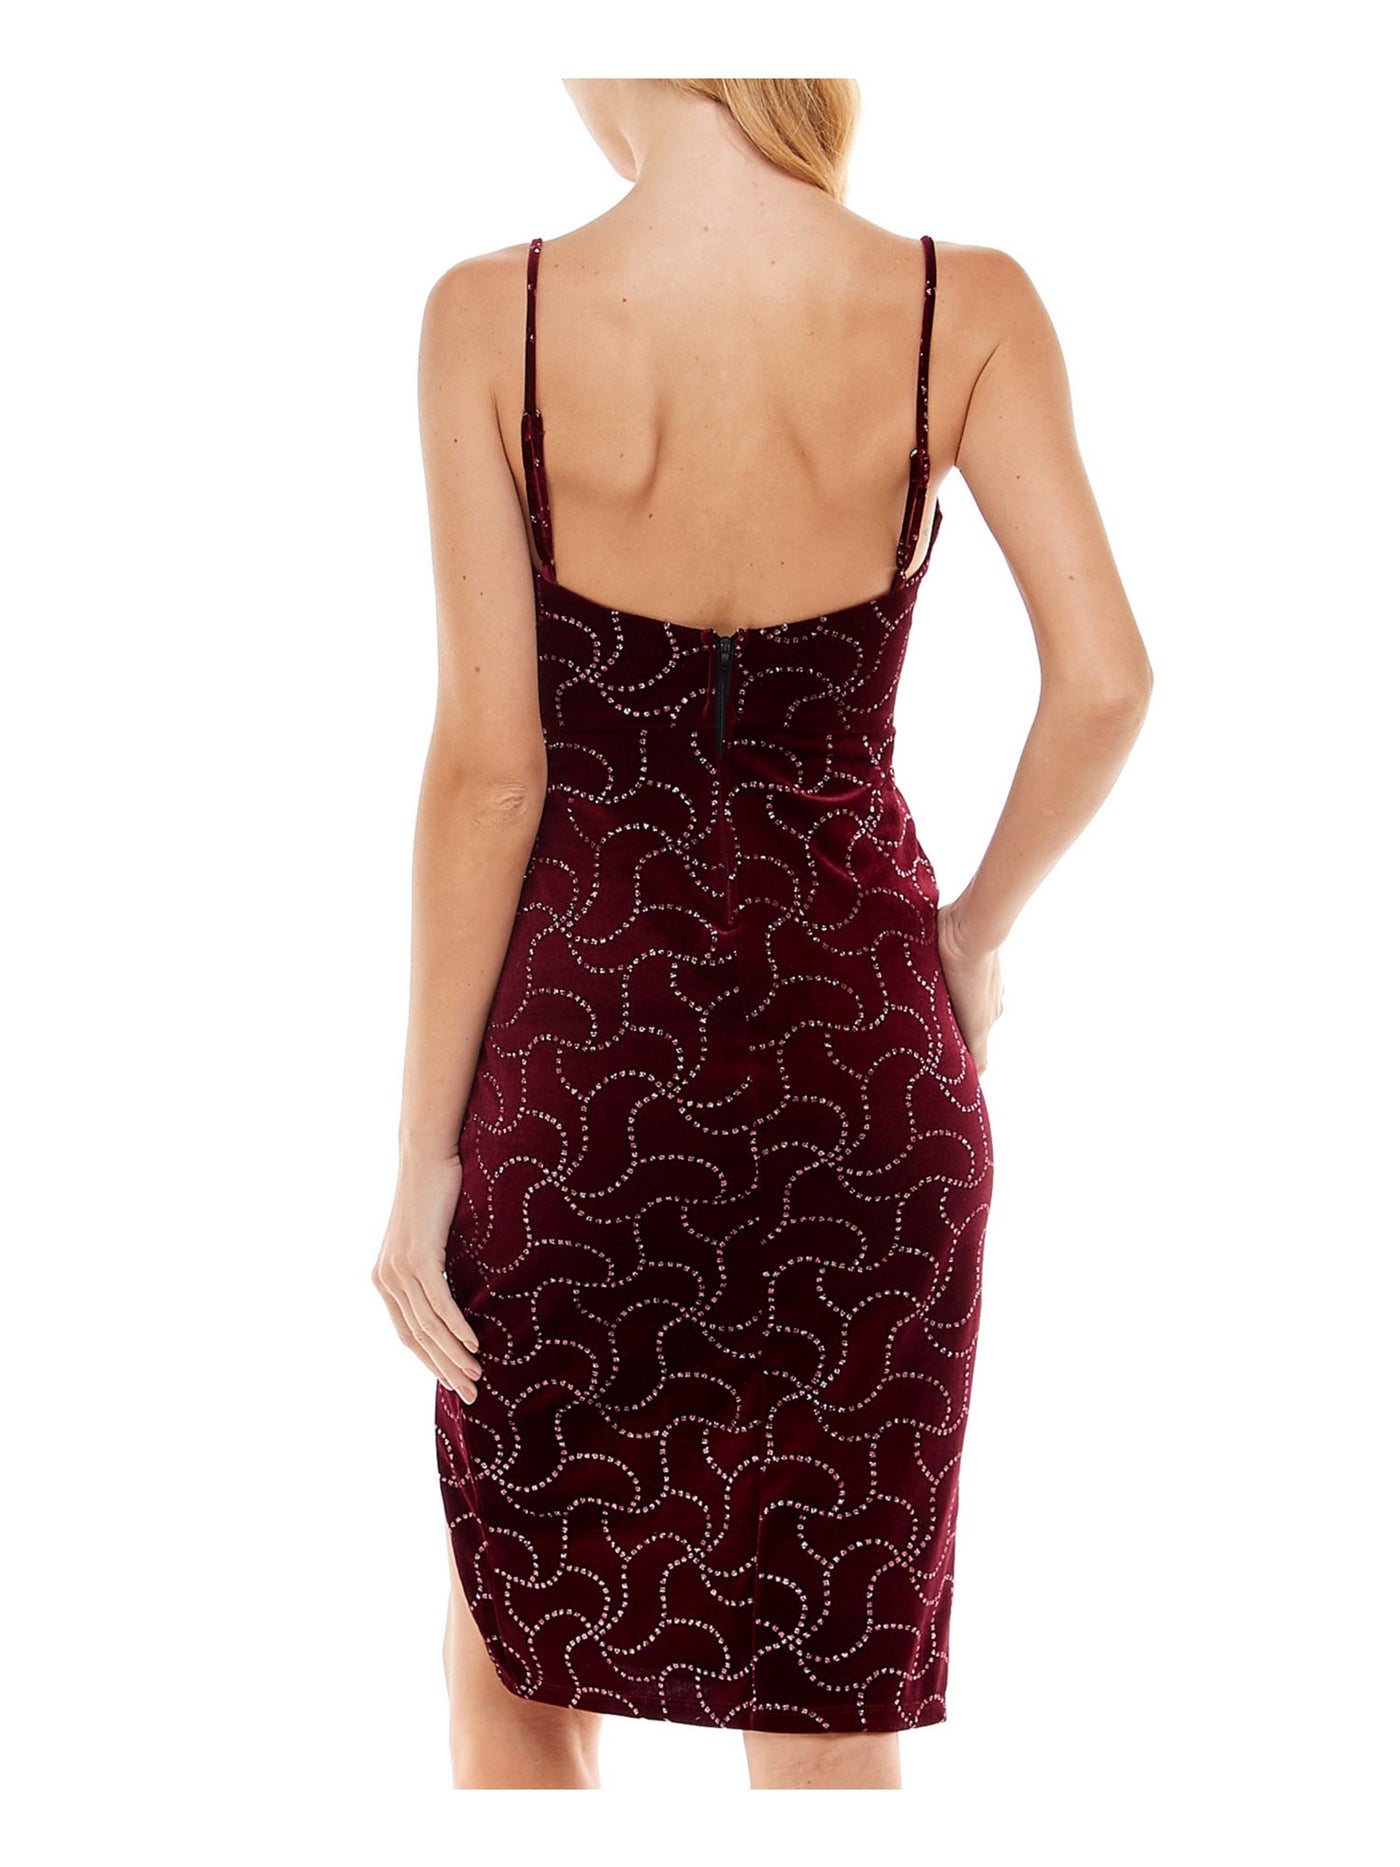 CITY STUDIO Womens Burgundy Zippered Slitted Lined Molded Bodice Spaghetti Strap Sweetheart Neckline Above The Knee Party Sheath Dress Juniors S